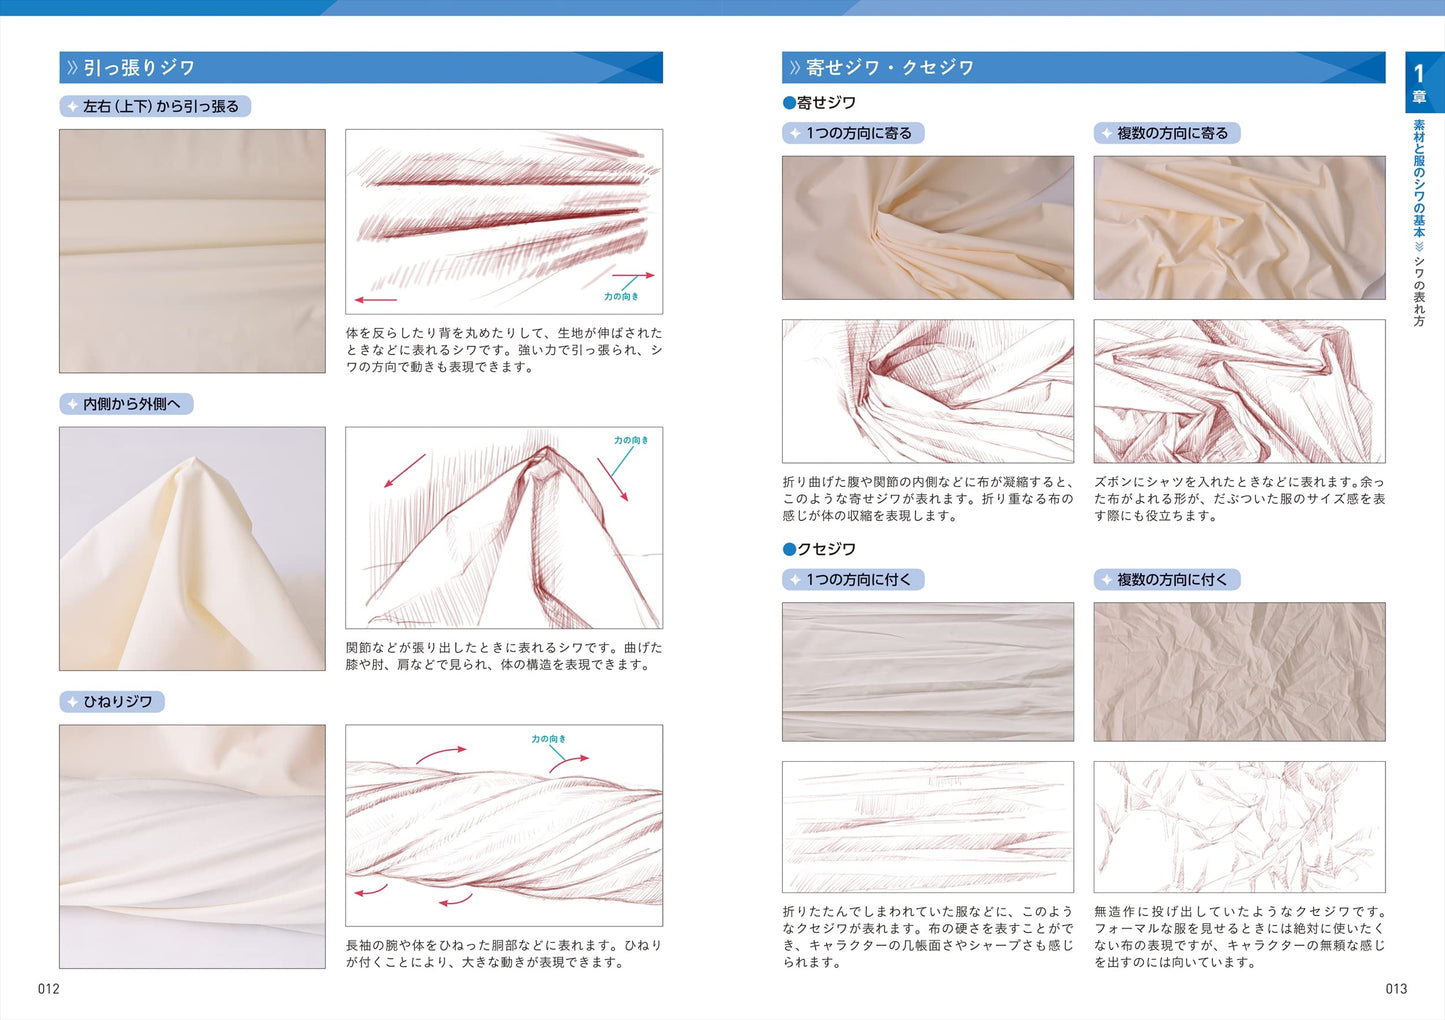 A thorough explanation of the entire process, How To Draw Wrinkles on Clothes Lesson